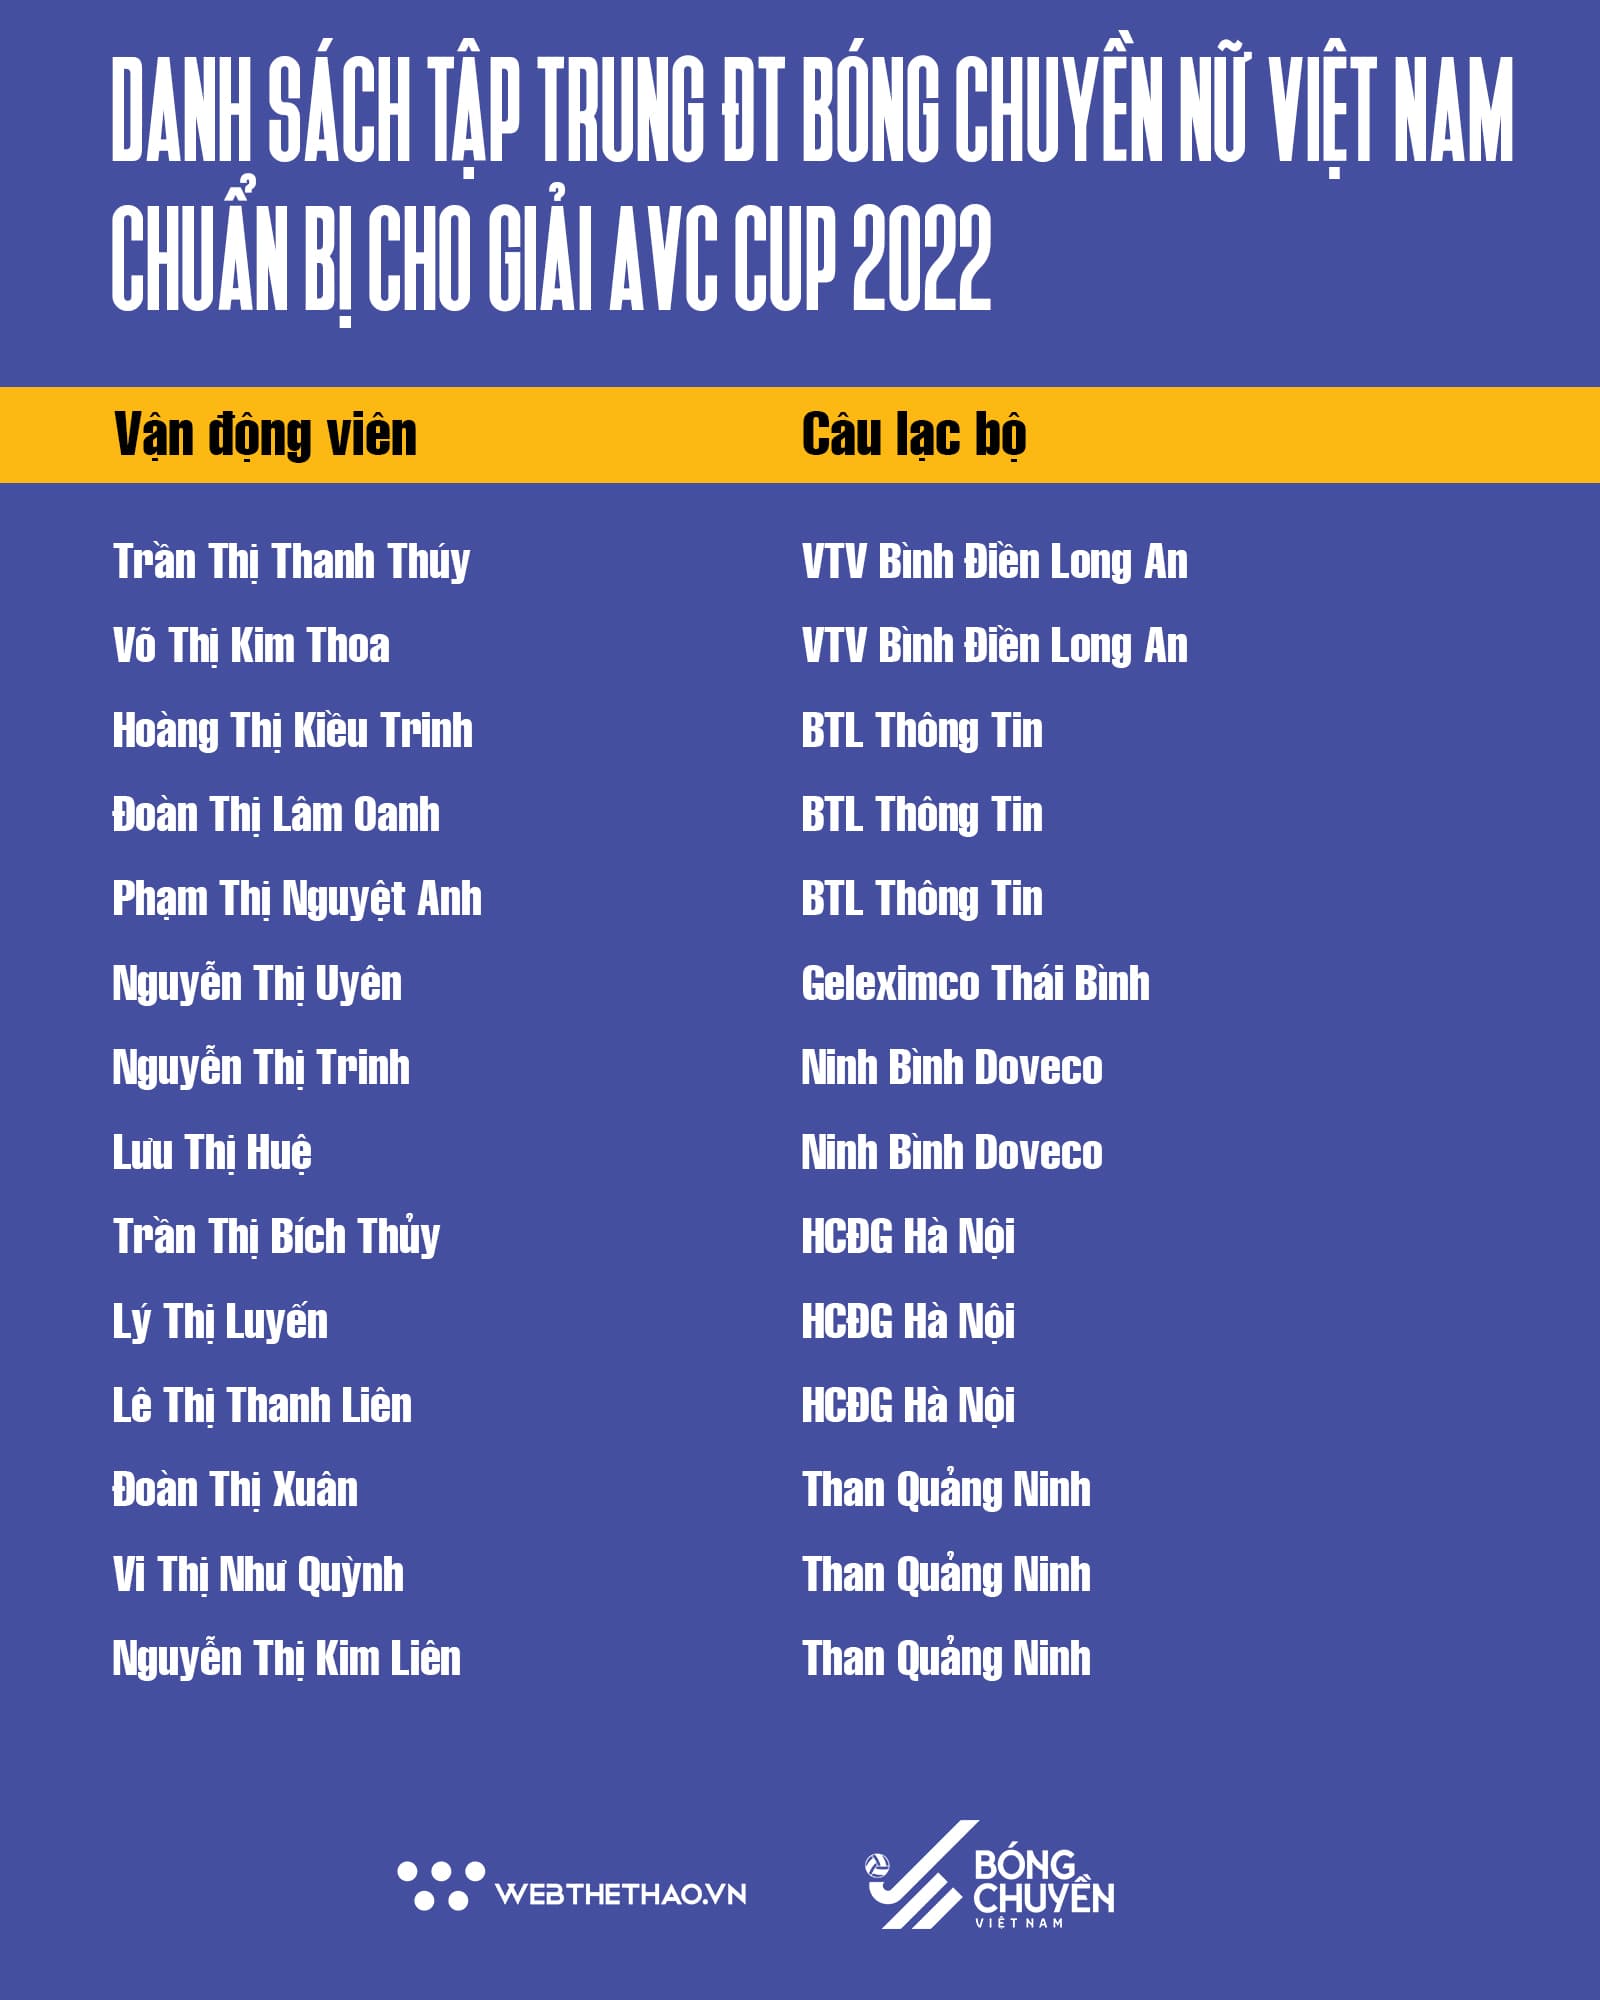 Vietnam Baseball is a Historic Milestone - List of 14 Vietnamese Players for AVC Cup 2022